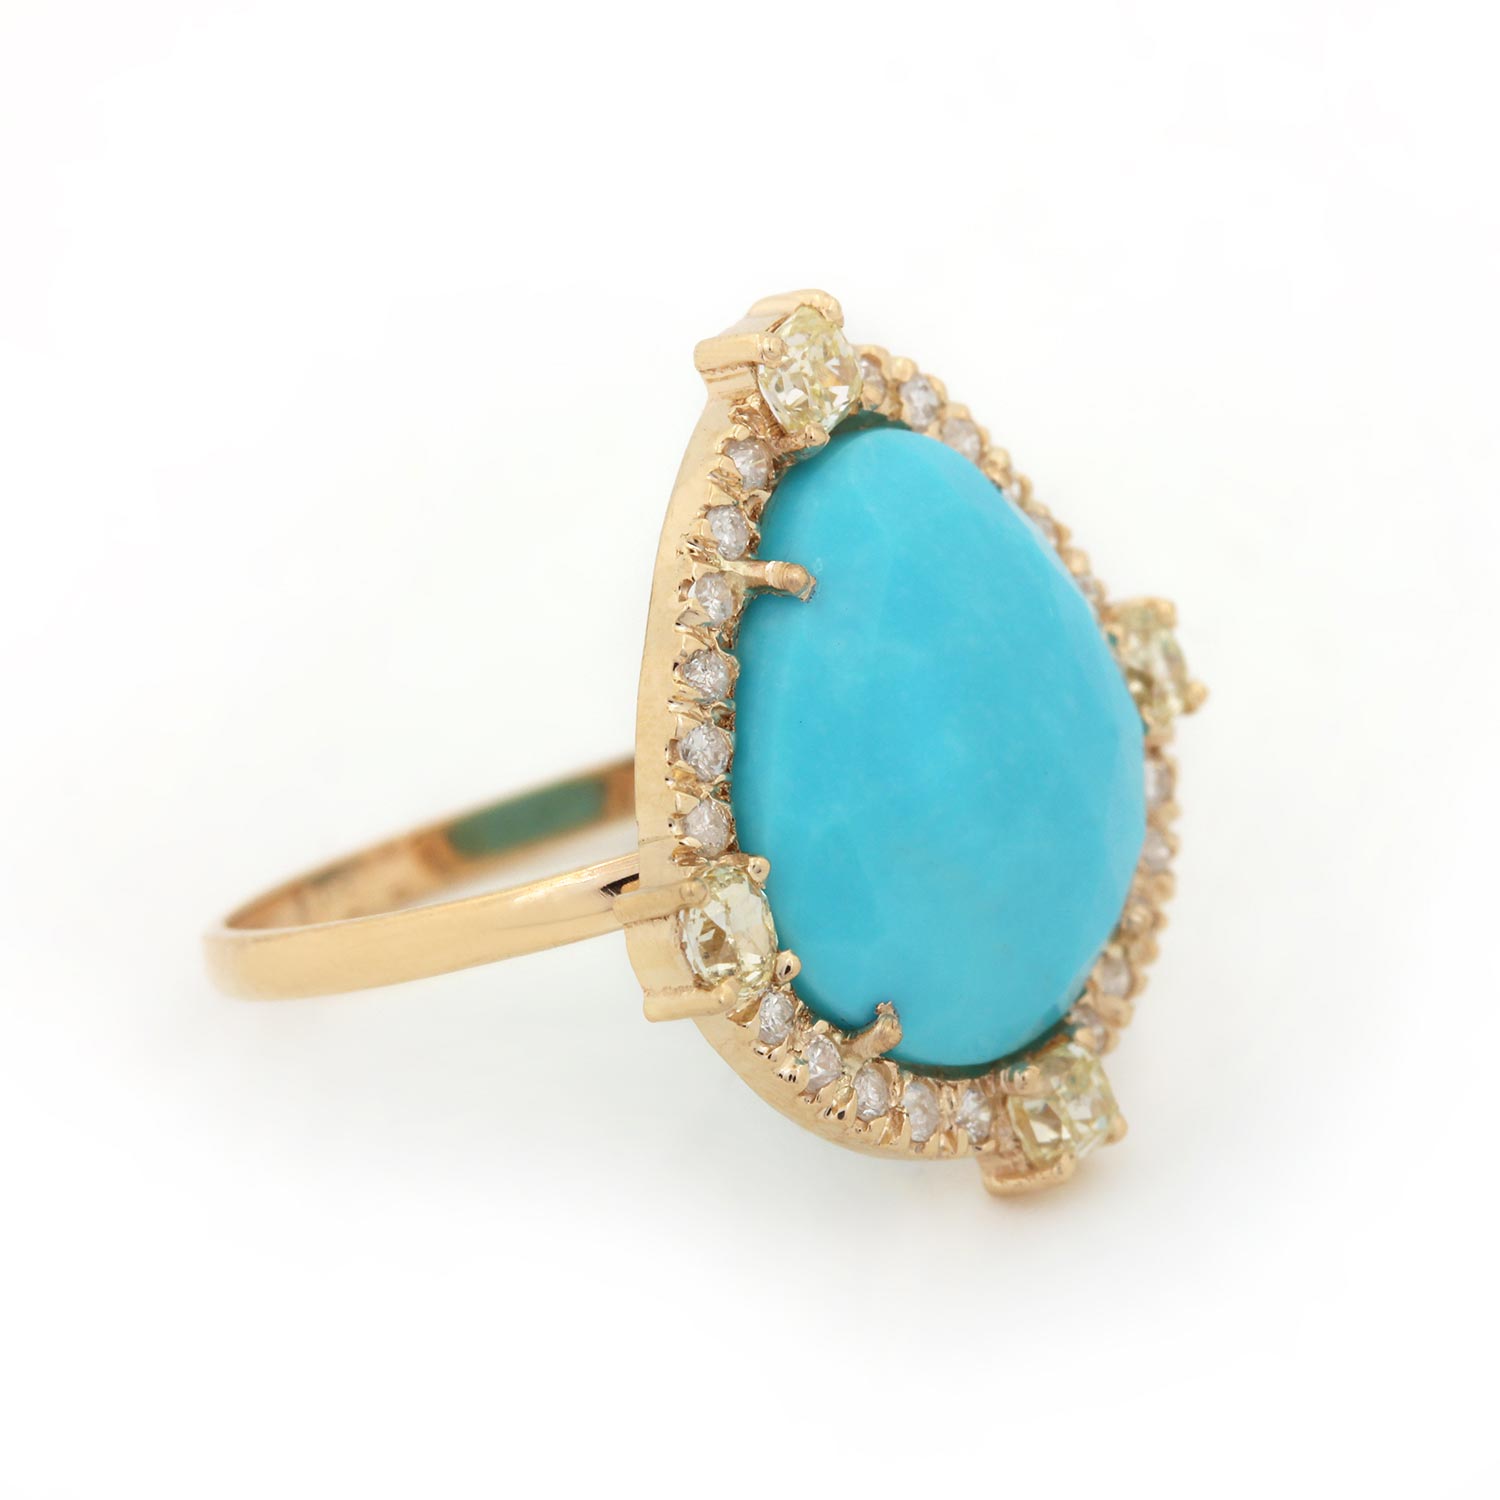 Turquoise 14K Solid Gold Cocktail Ring Pave Diamond Jewelry